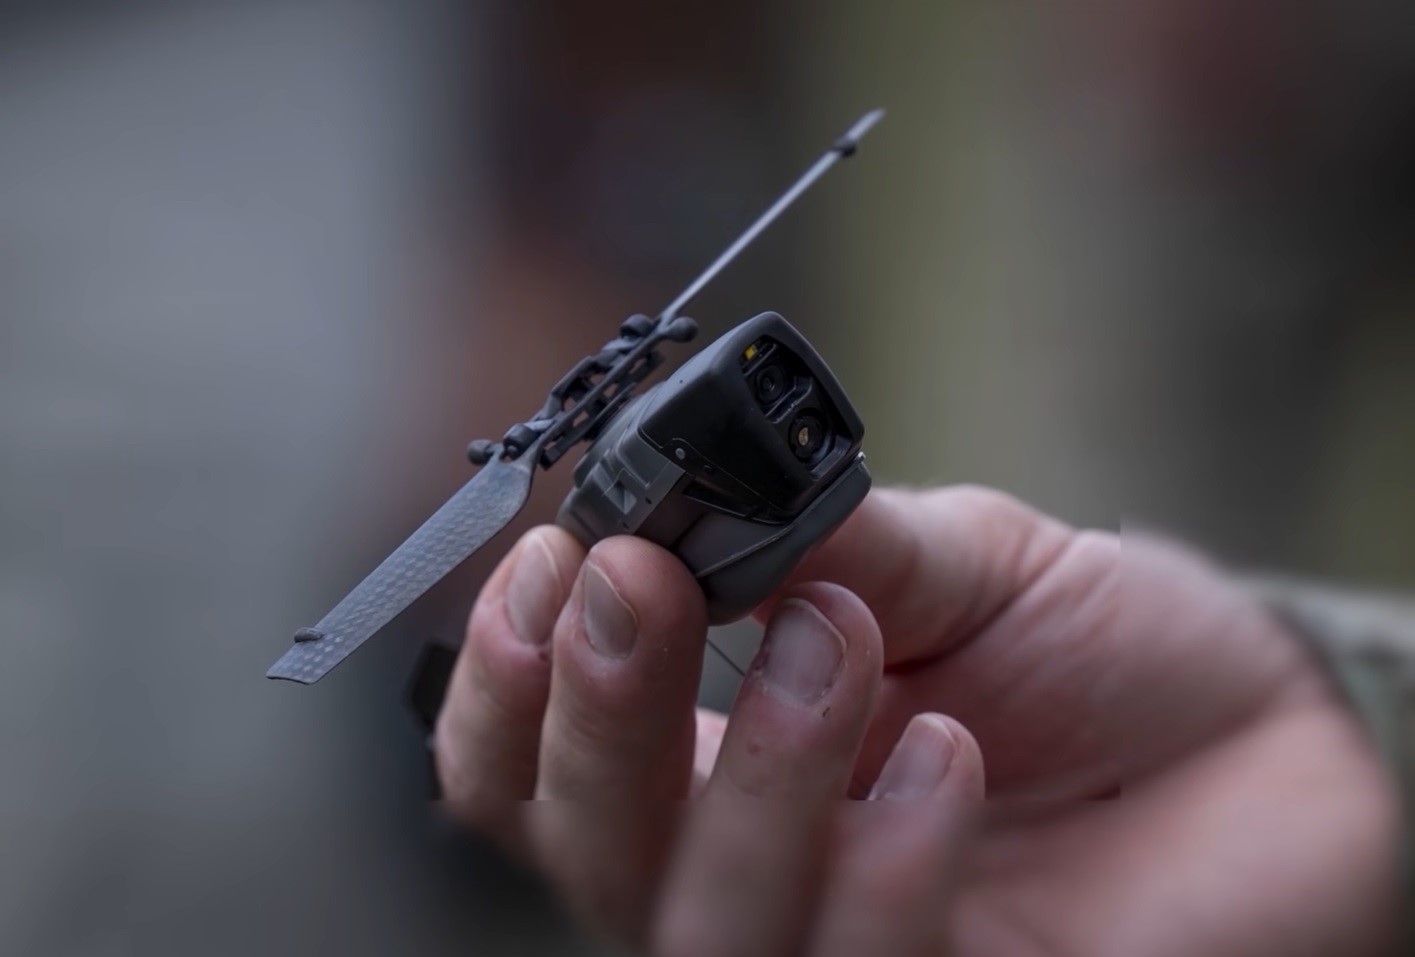 How Microdrone Use is Growing at the Frontline in Ukraine